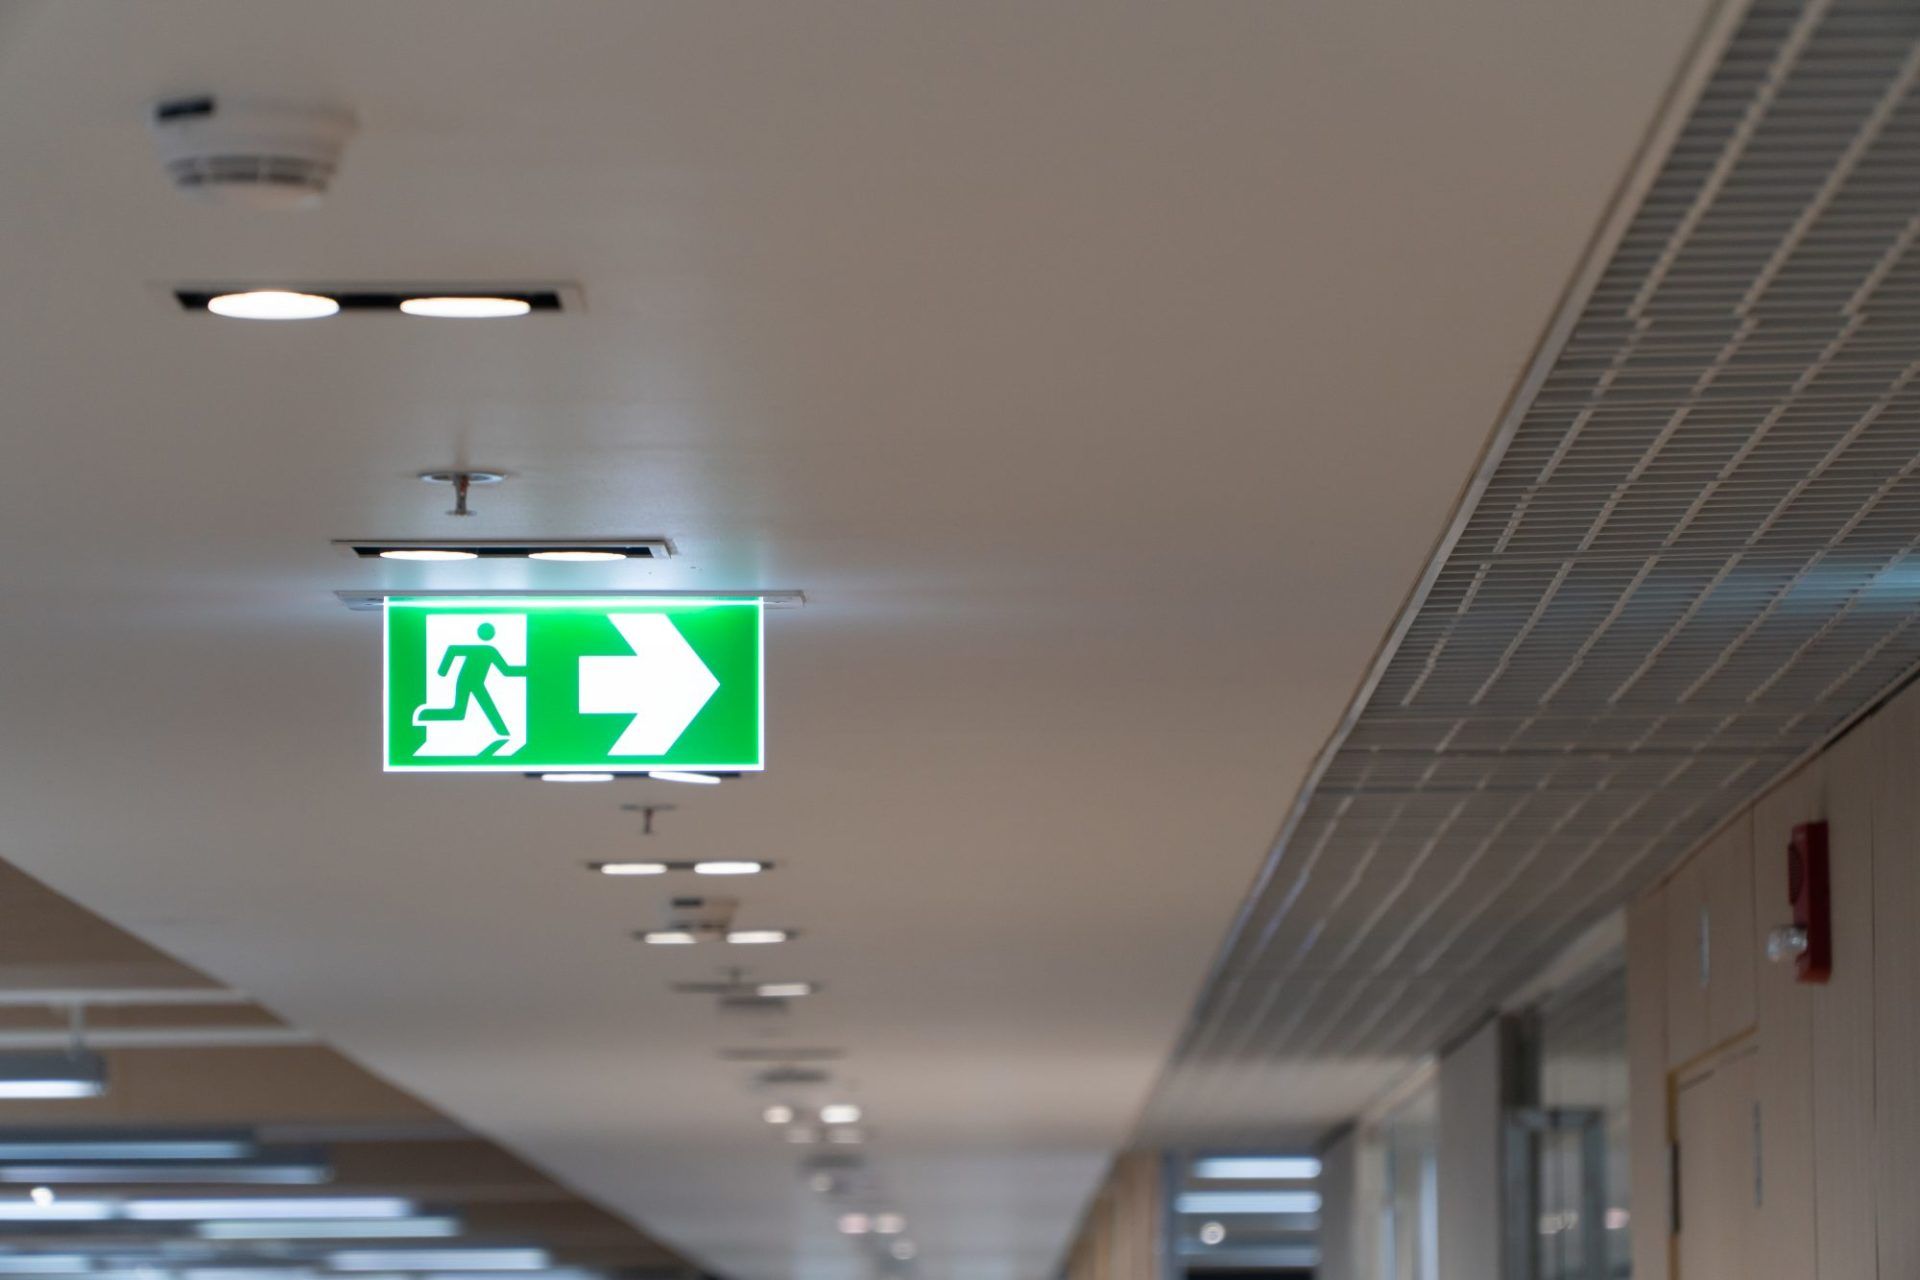 Mymesh monitors status, functional testing and duration testing of emergency lighting